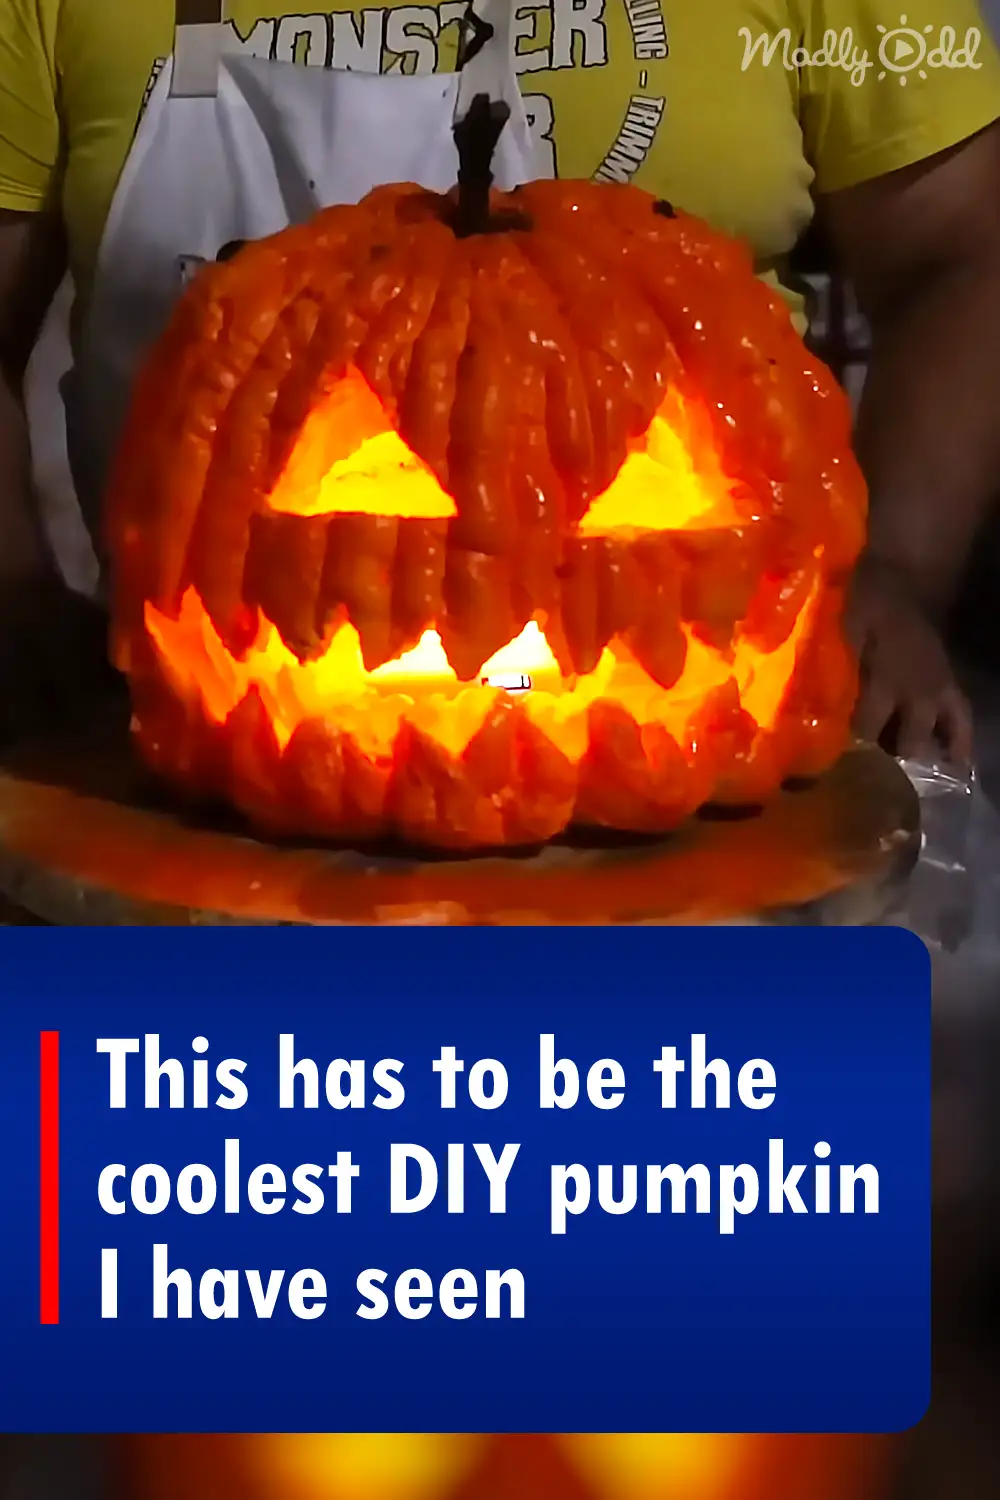 This has to be the coolest DIY pumpkin I have seen